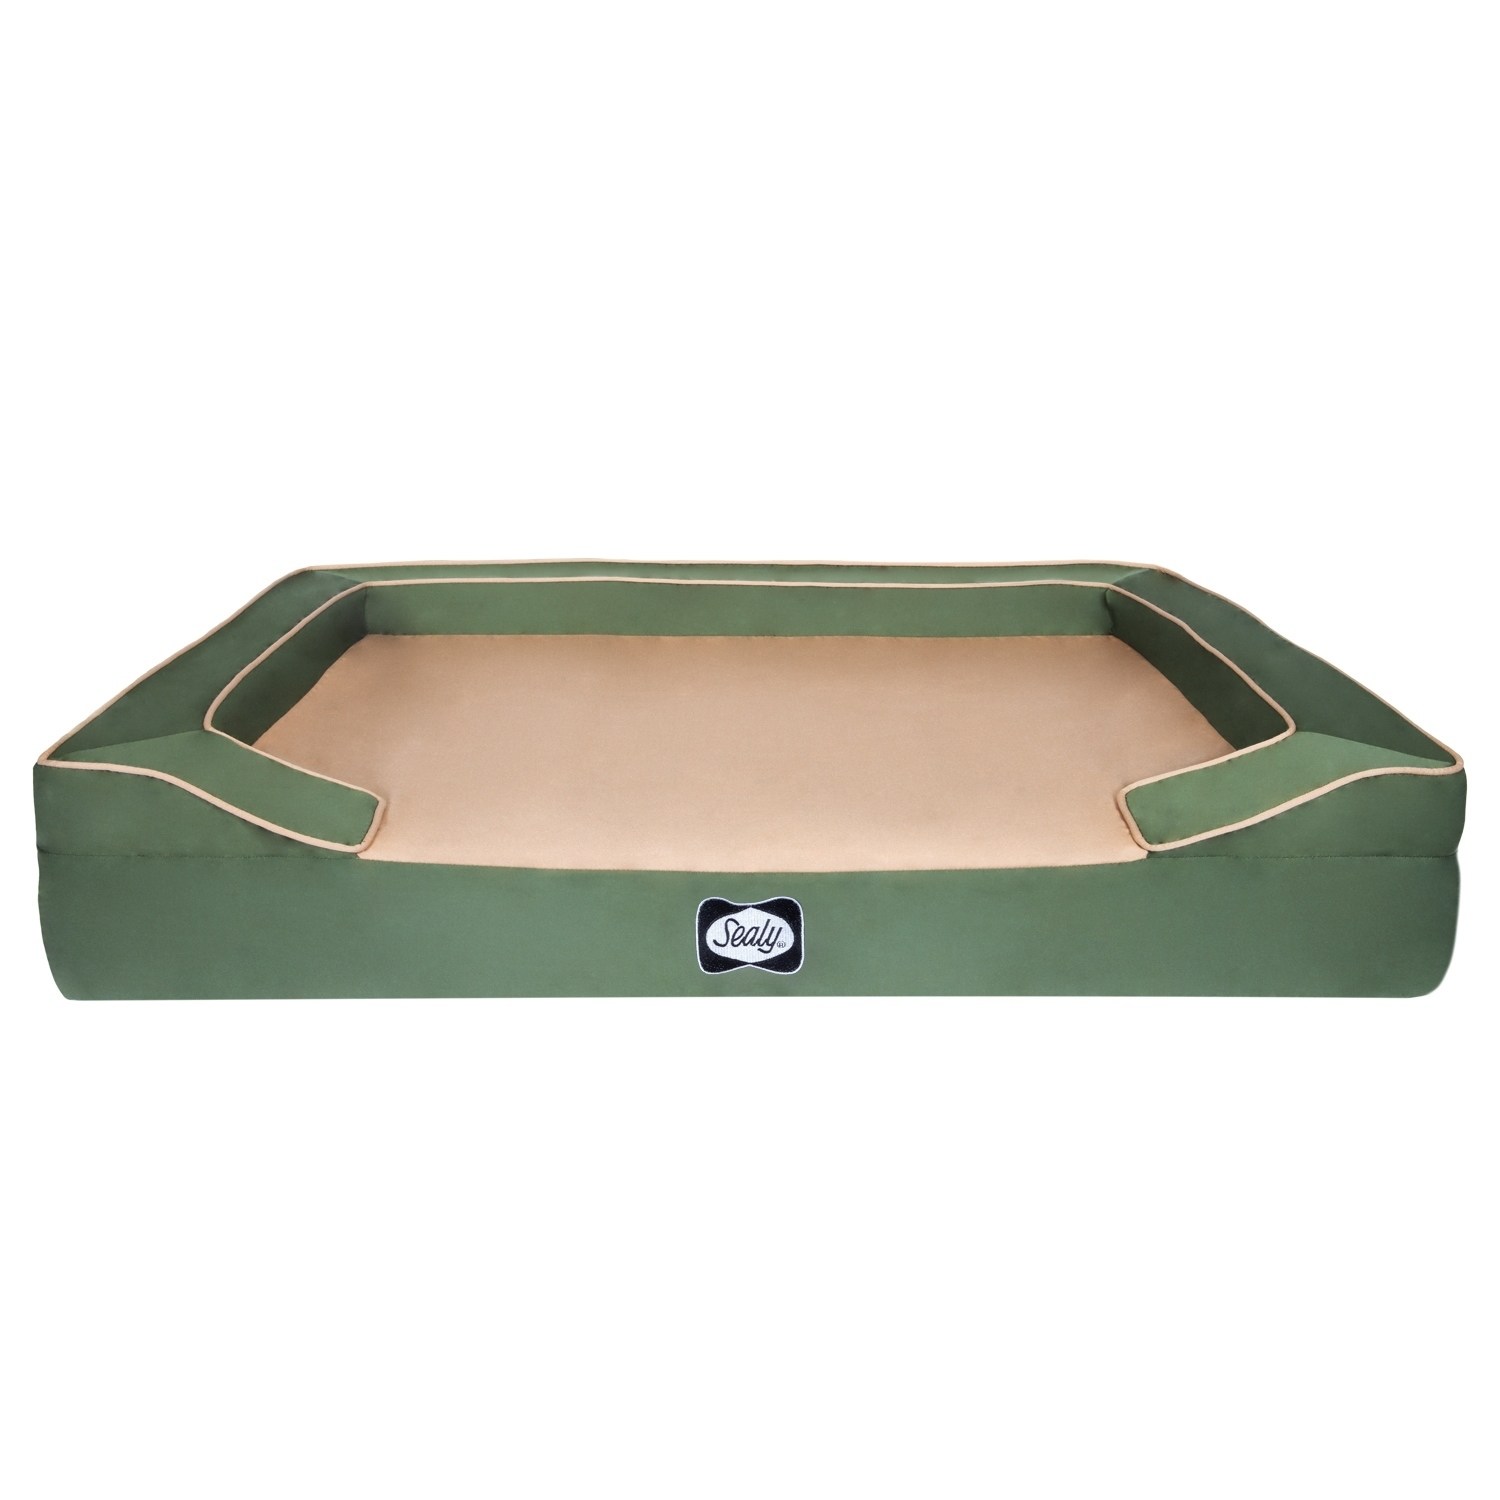 Sealy Lux Elite Quad Element Orthopedic and Memory Foam Dog Bed - image 4 of 4